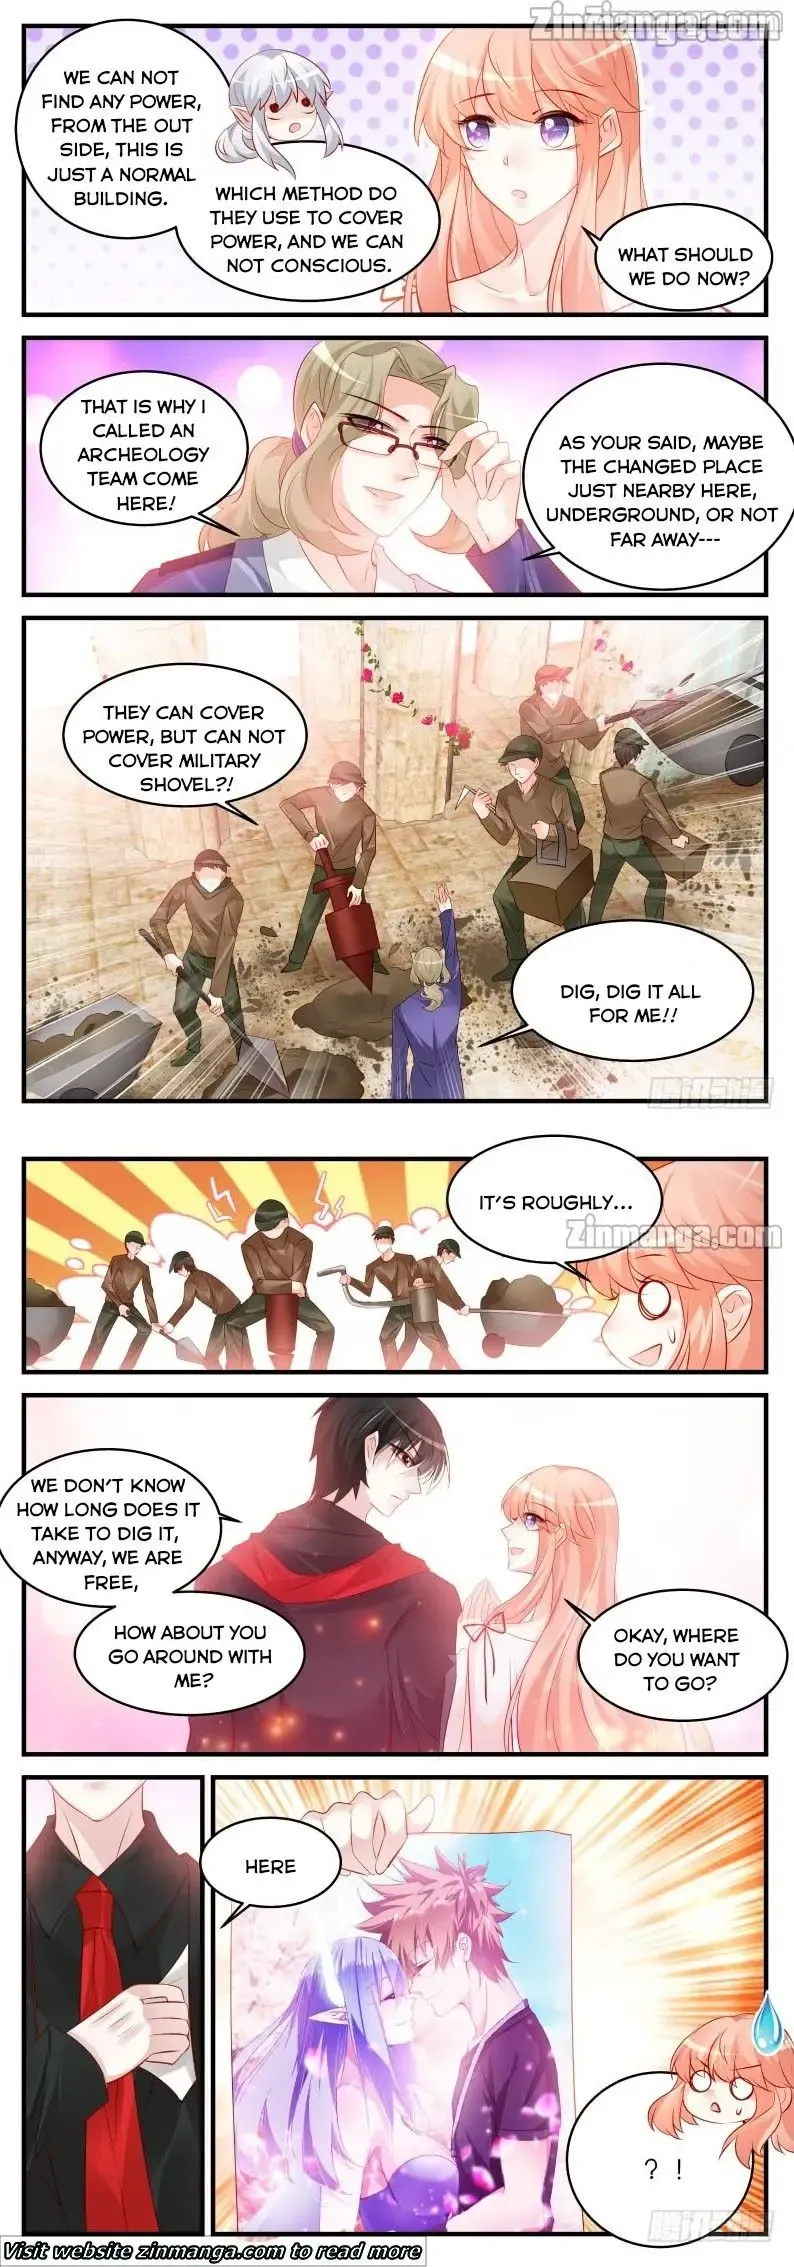 Teach the devil husband Chapter 232 page 2